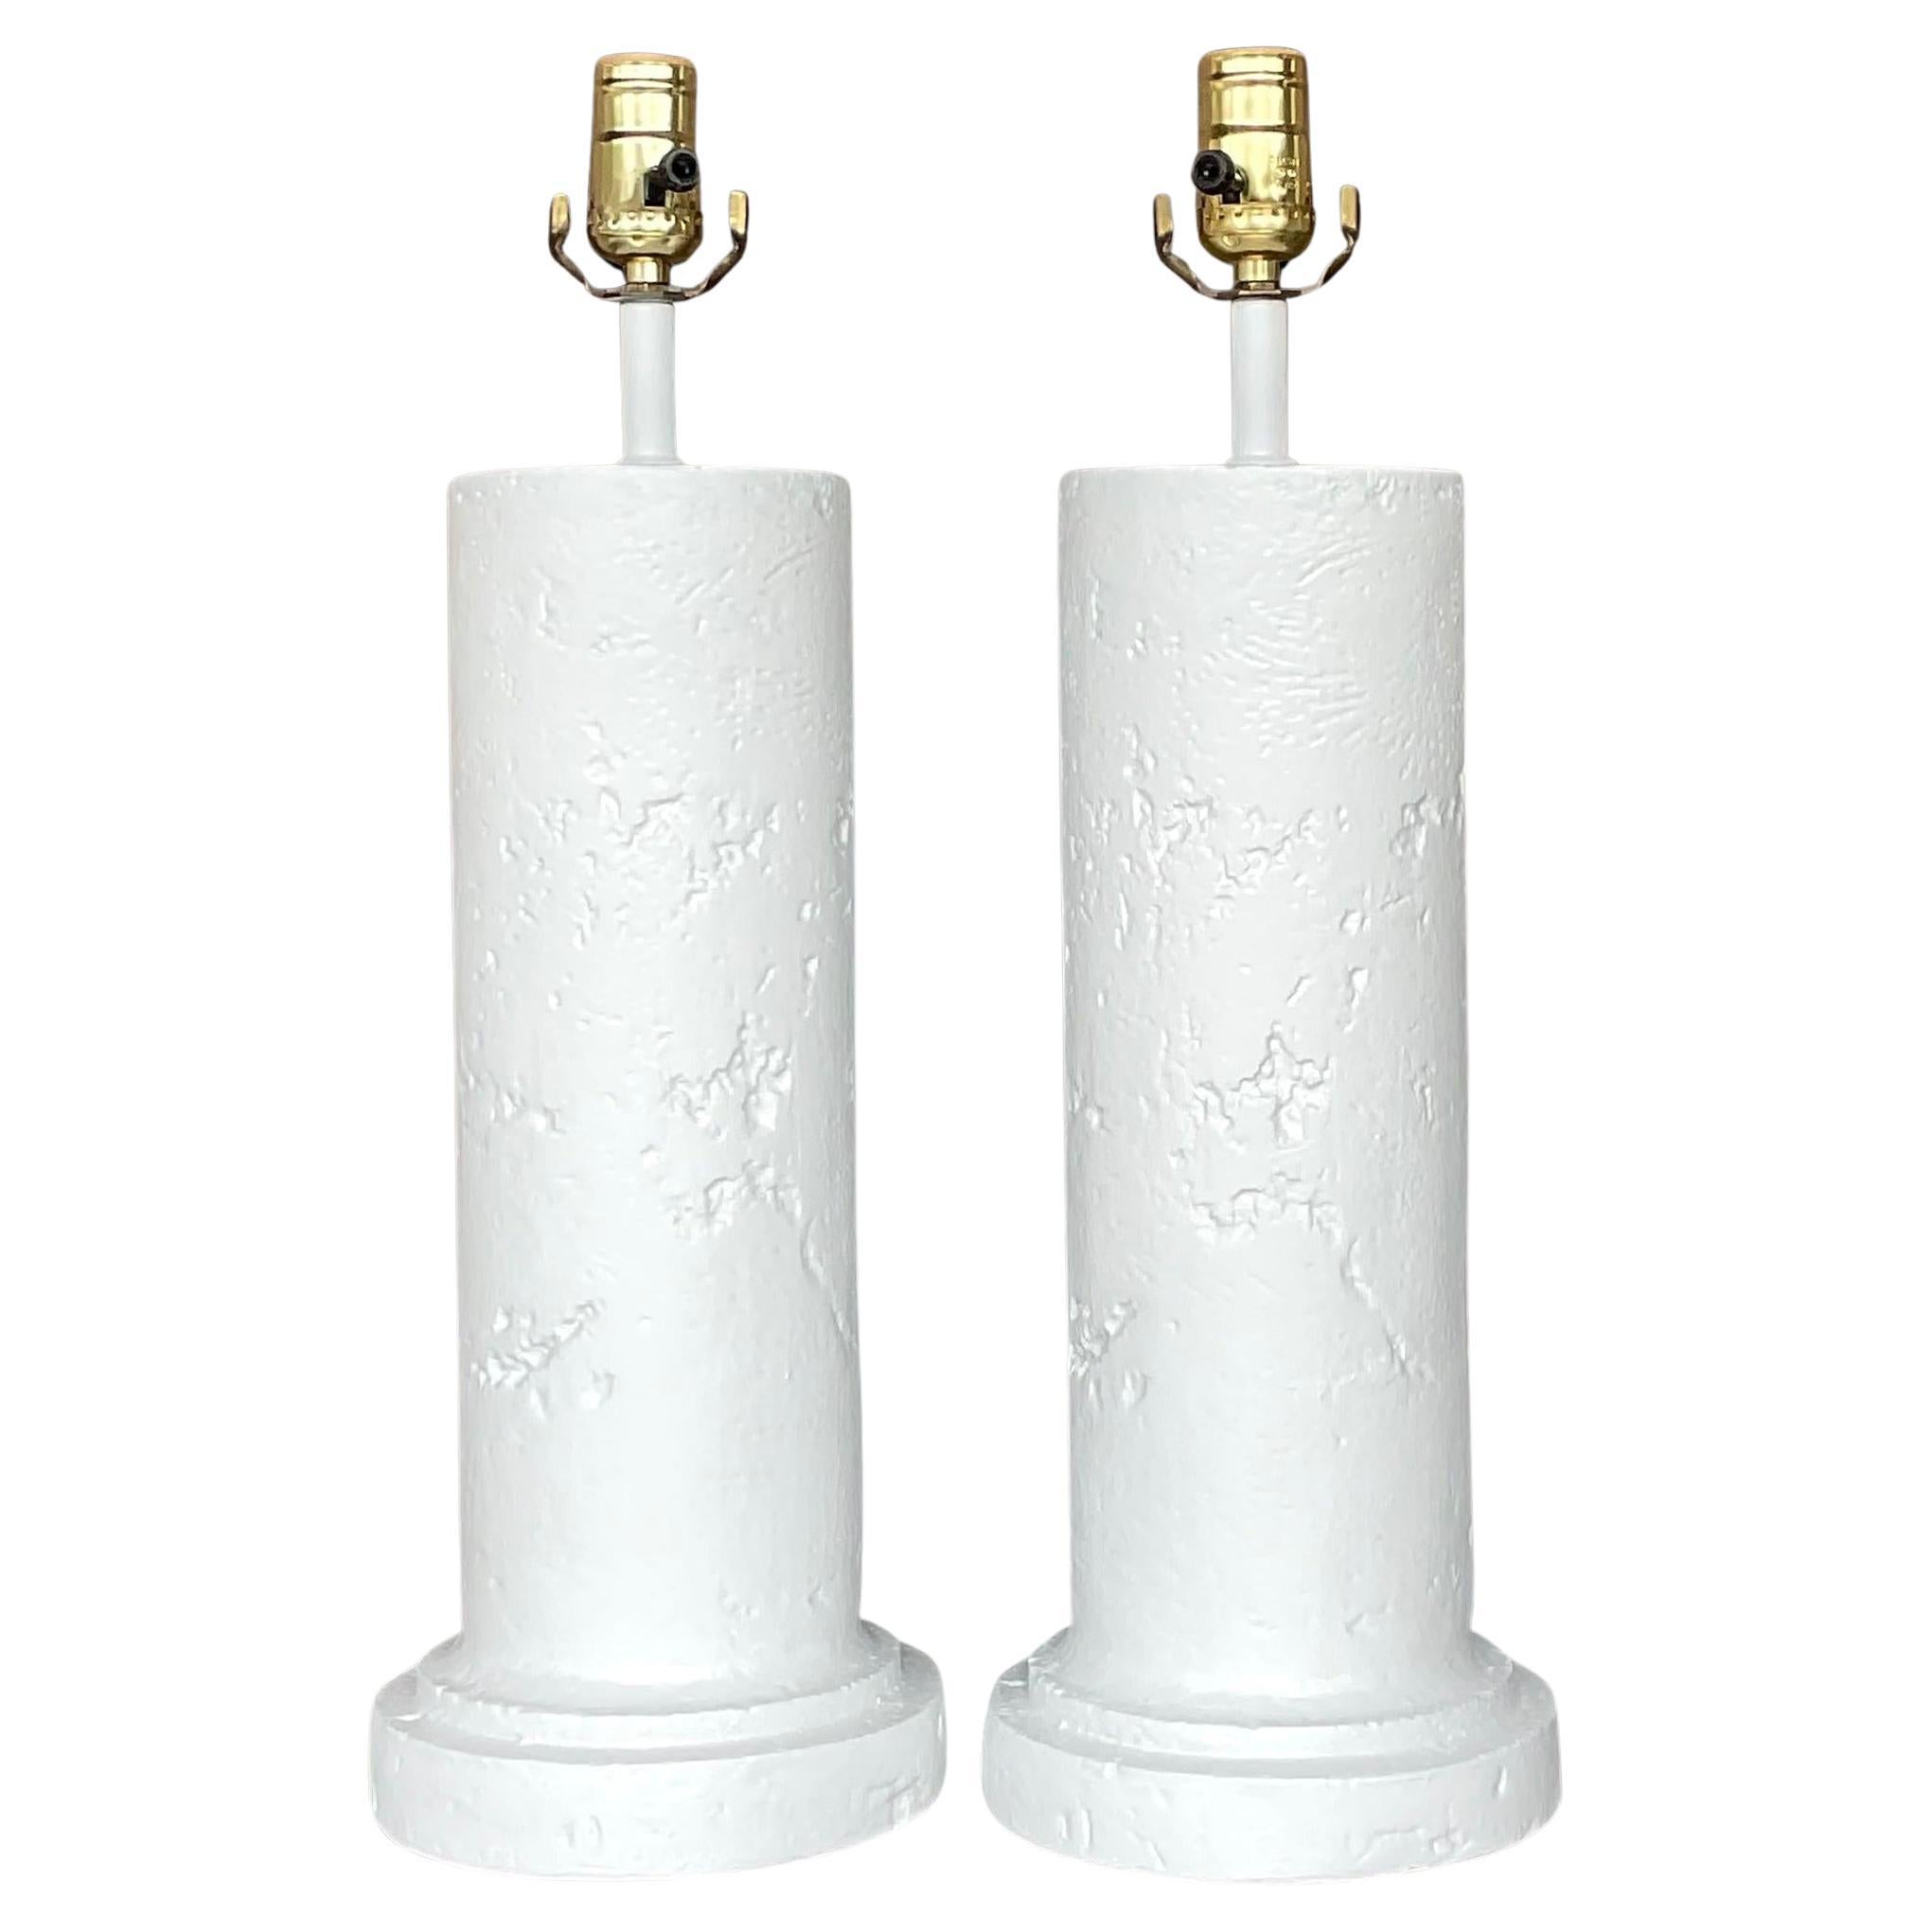 Vintage Coastal Molded Coral Plaster Lamps - a Pair For Sale